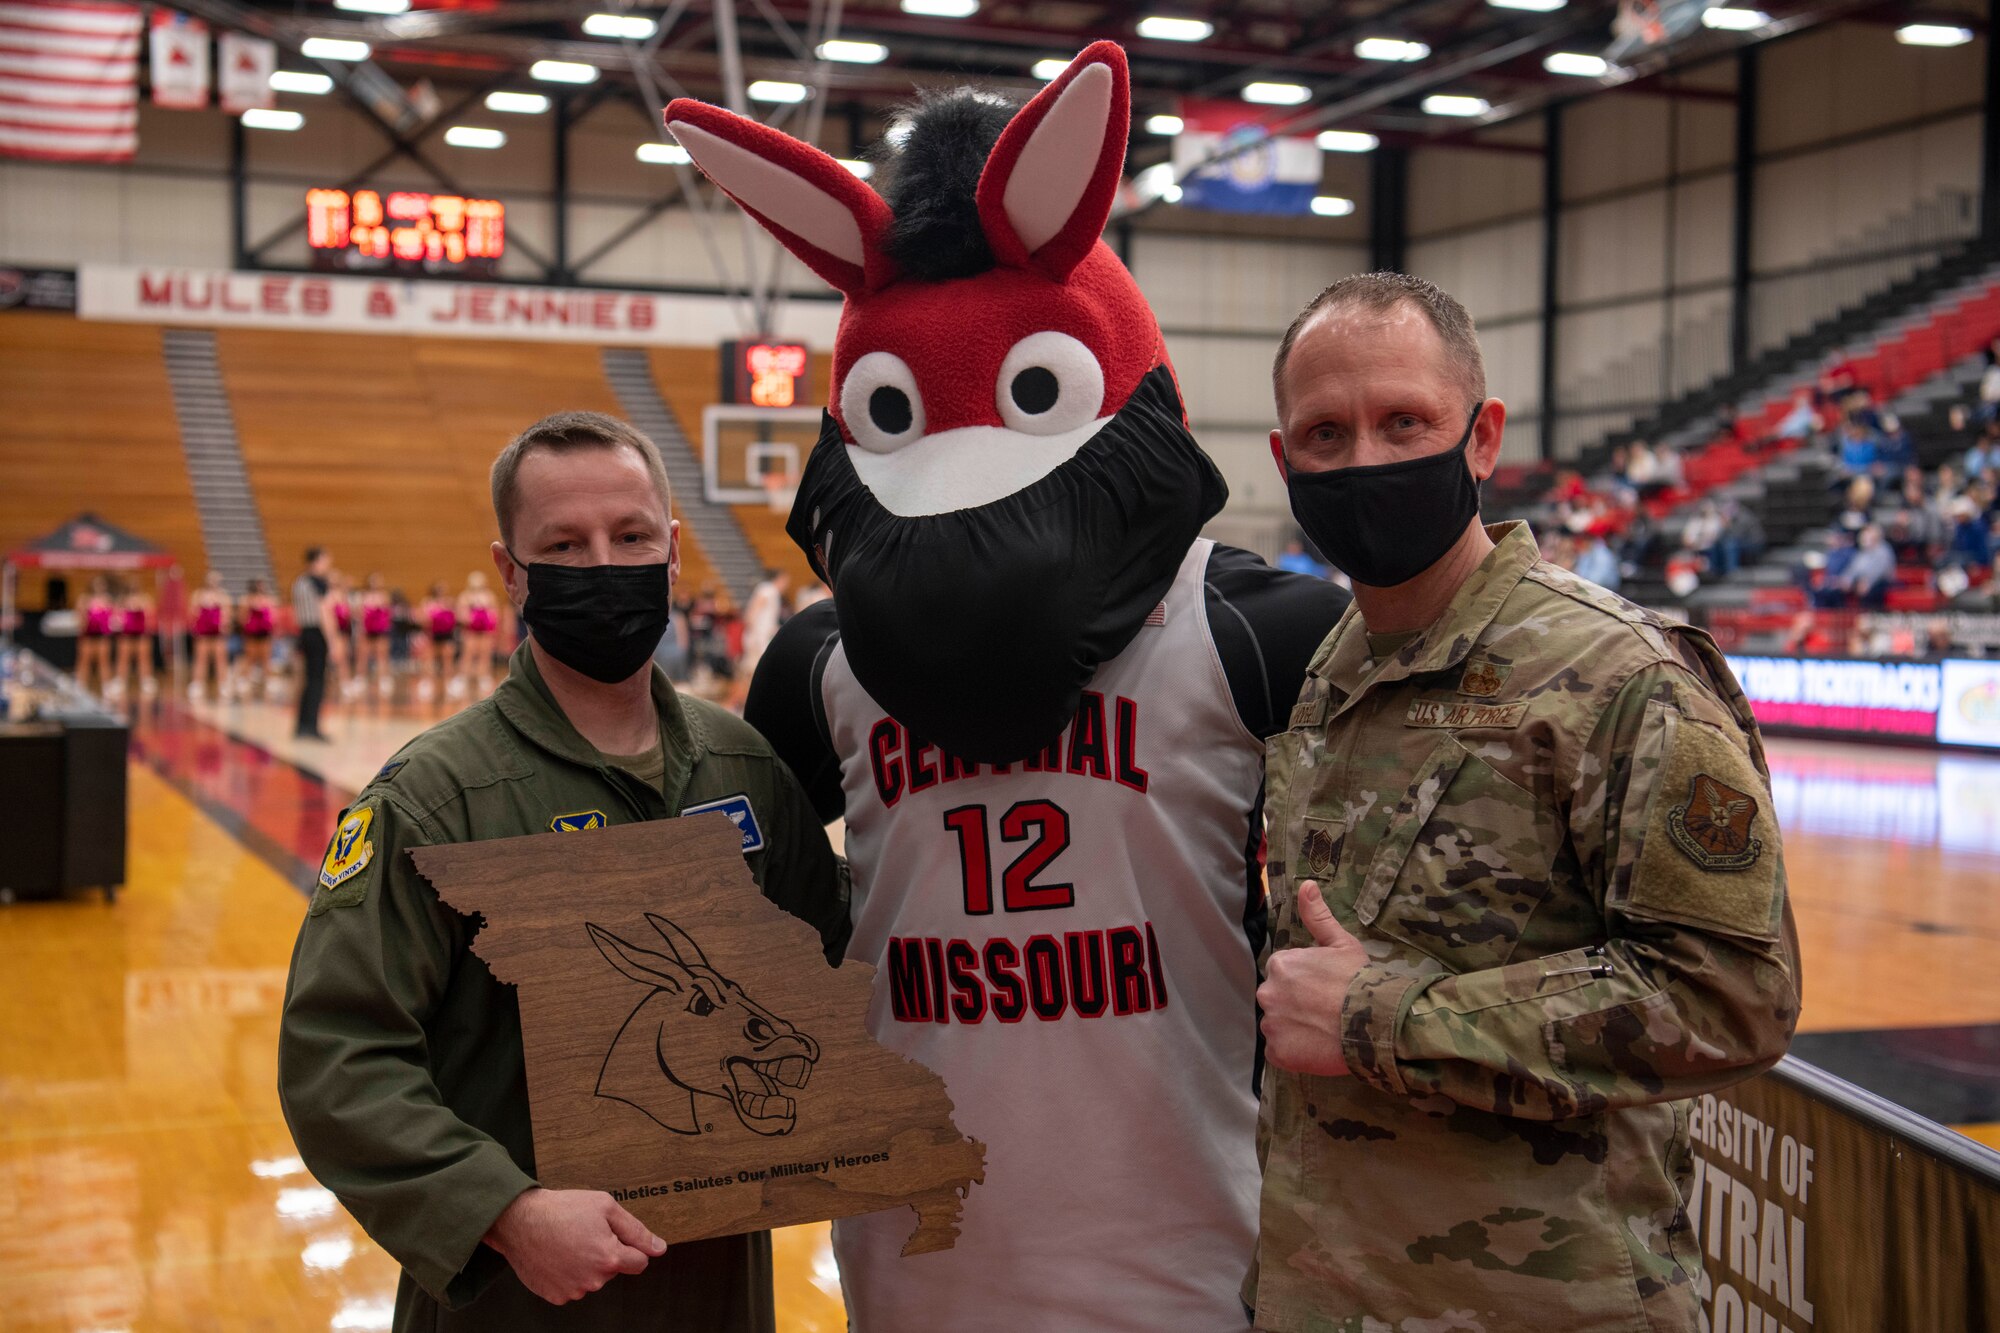 U.S. Air Force Col. Kyle Wilson, 509th Bomb Wing vice commander, left, and Chief Master Sgt. Jason Hodges, 509th BW command chief, right, pose for a photo with the University of Central Missouri mascot during the UCM Military Appreciation basketball game, Feb. 13, 2021, in Warrensburg, Missouri. Whiteman AFB and UCM share a valuable community partnership that fosters a supportive relationship between the base and local communities. (U.S. Air Force photo by Tech. Sgt. Dylan Nuckolls)